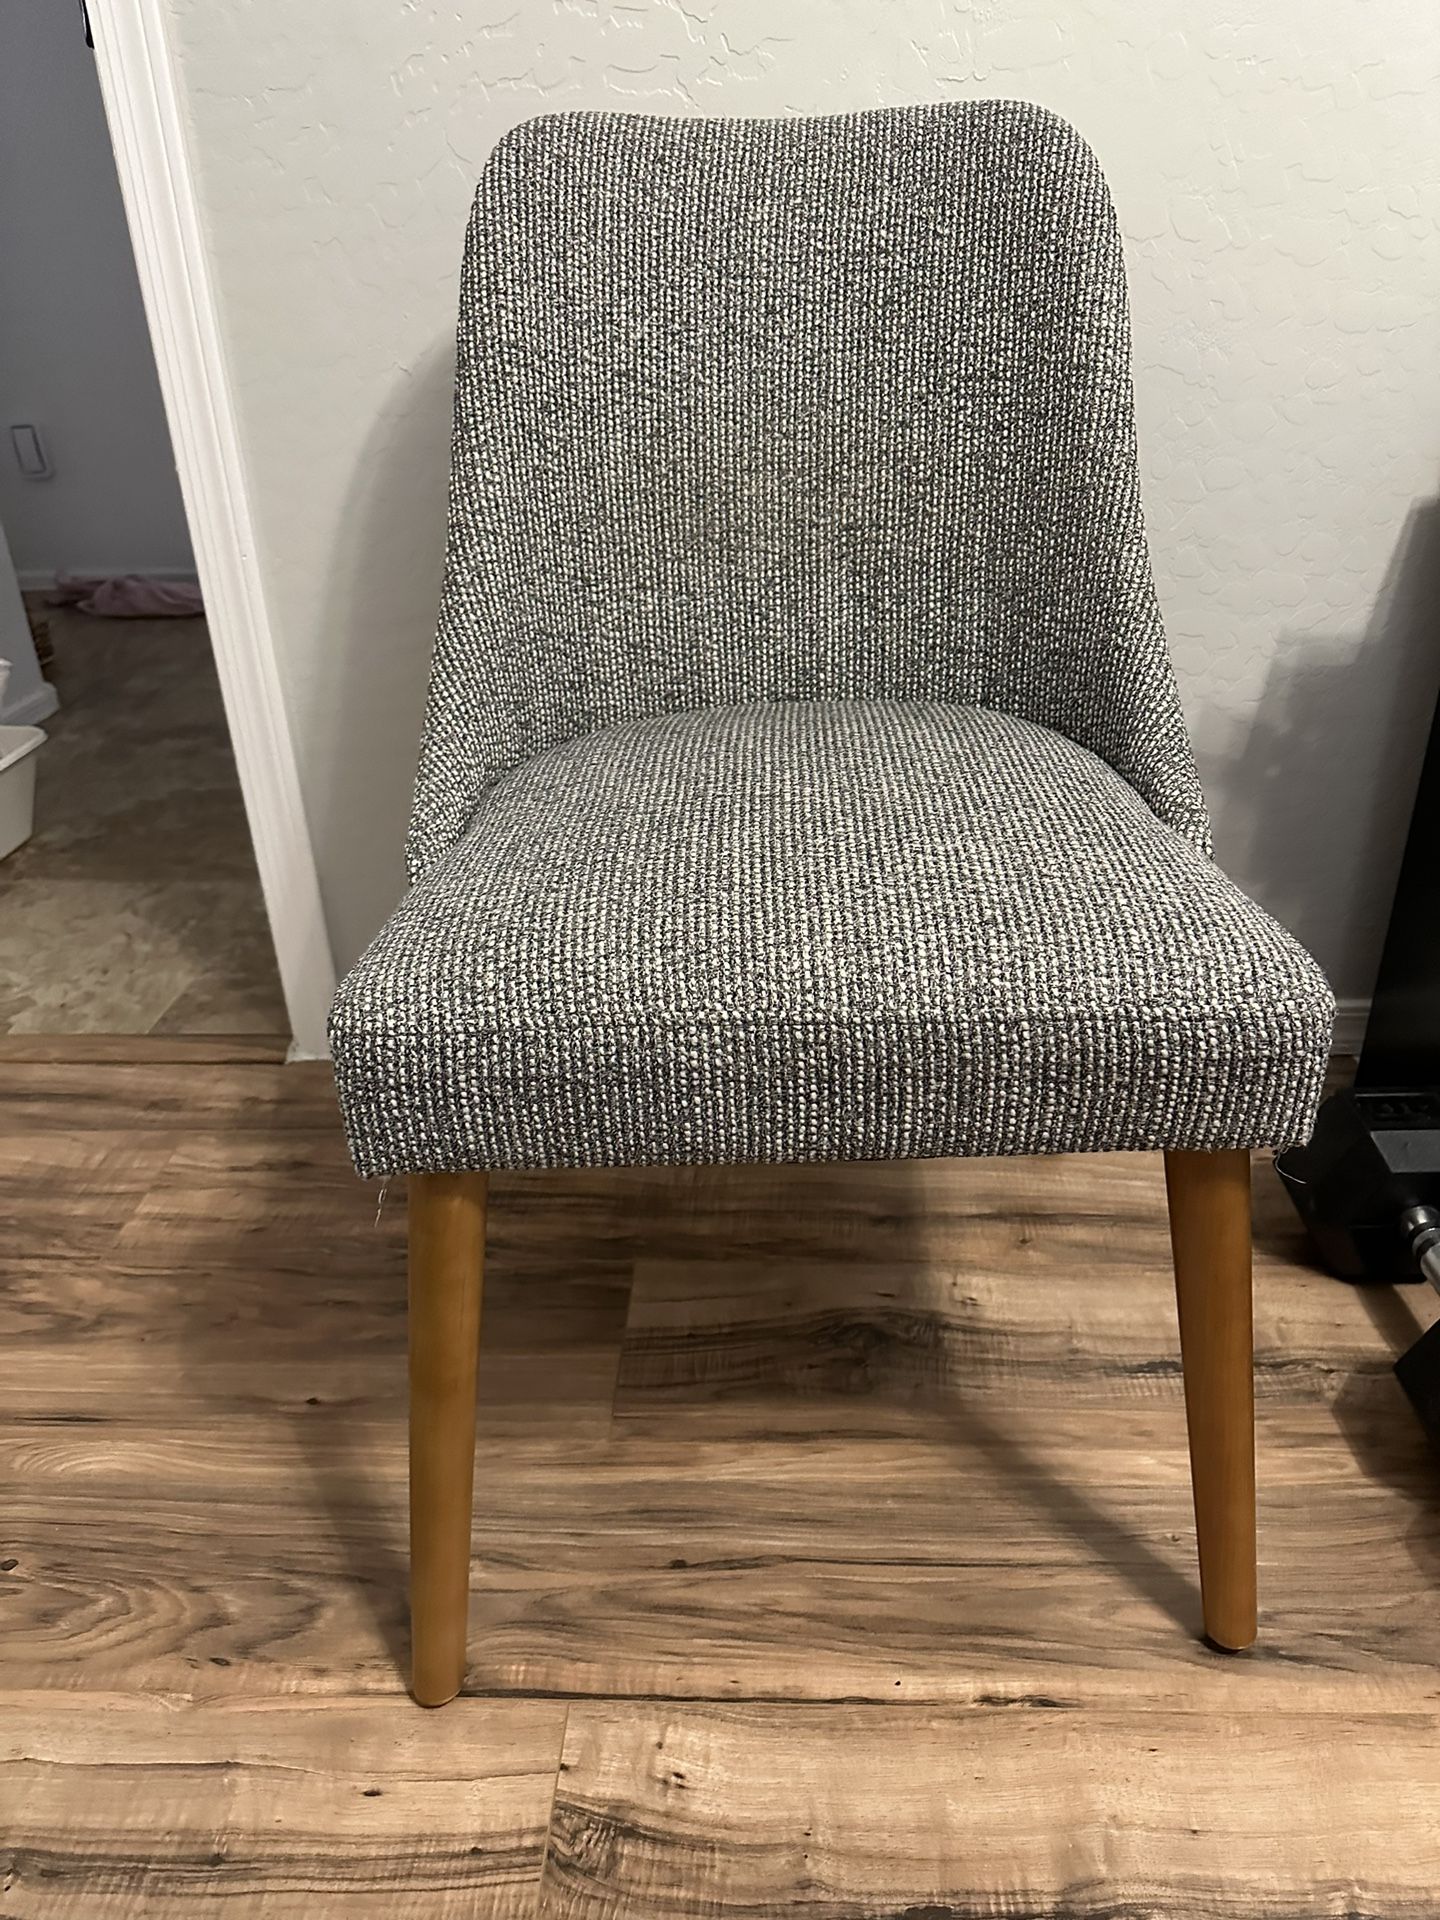 Gray Chair With Wooden Legs